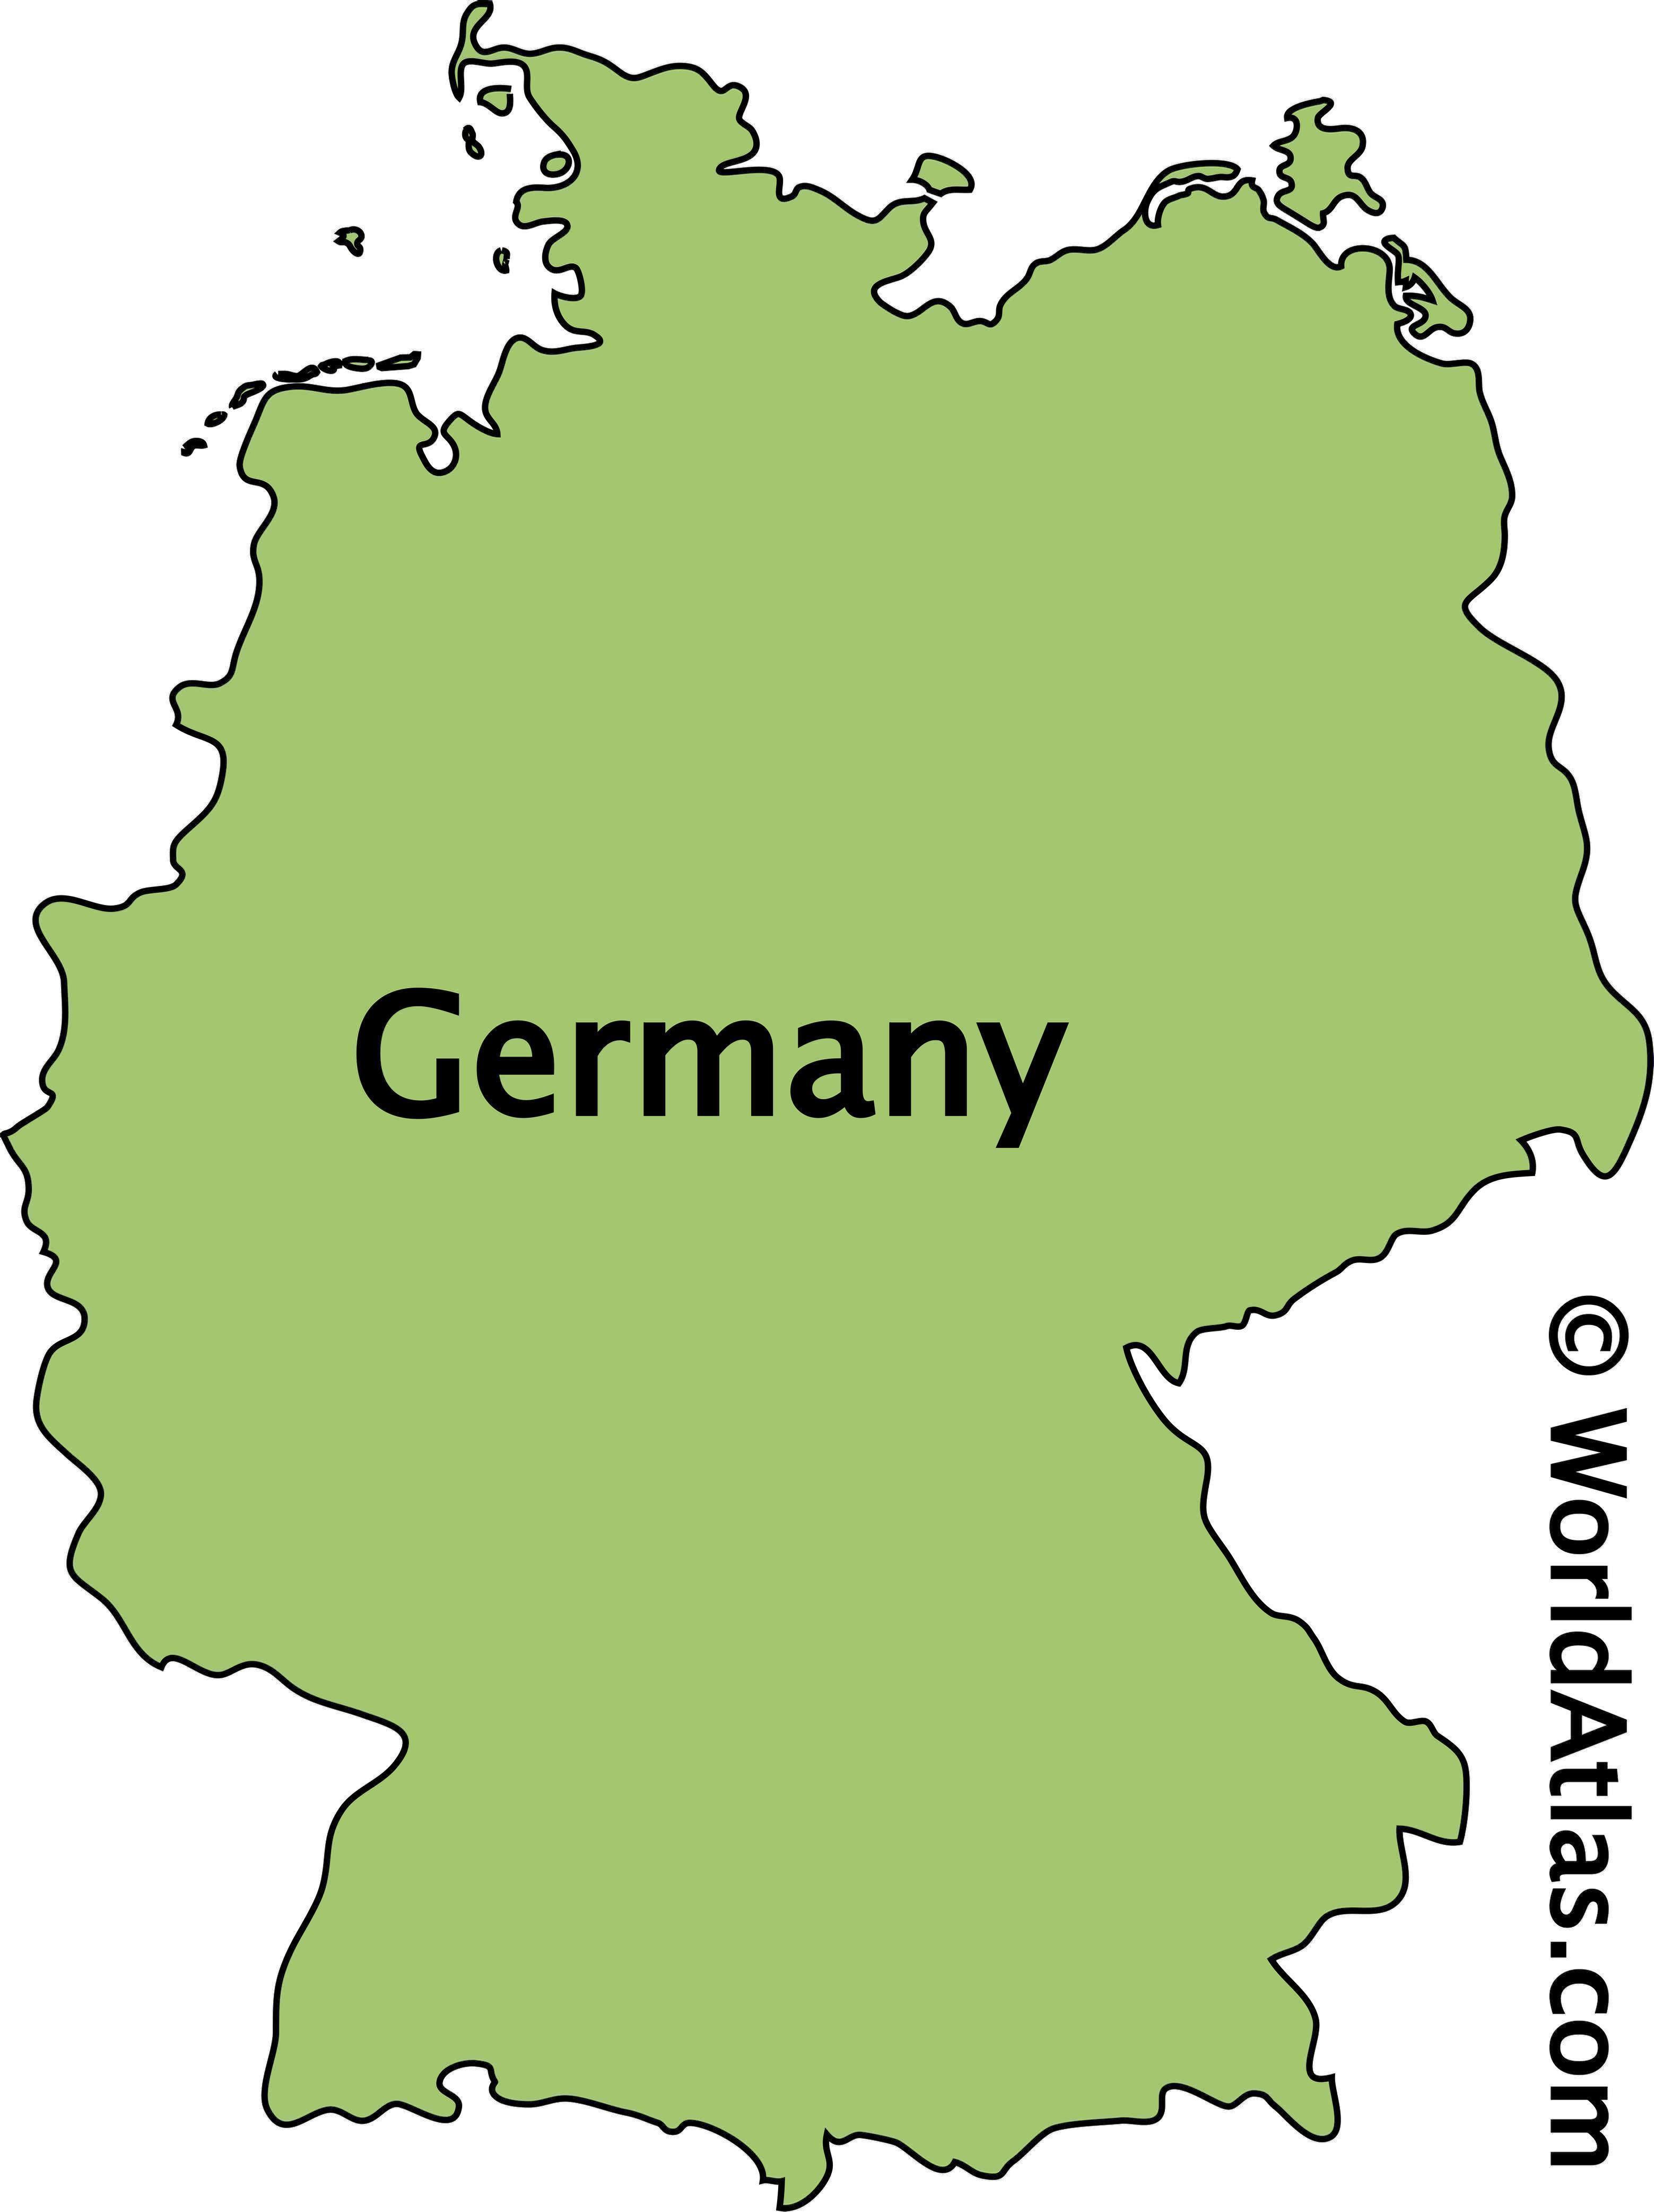 Show Germany On World Map